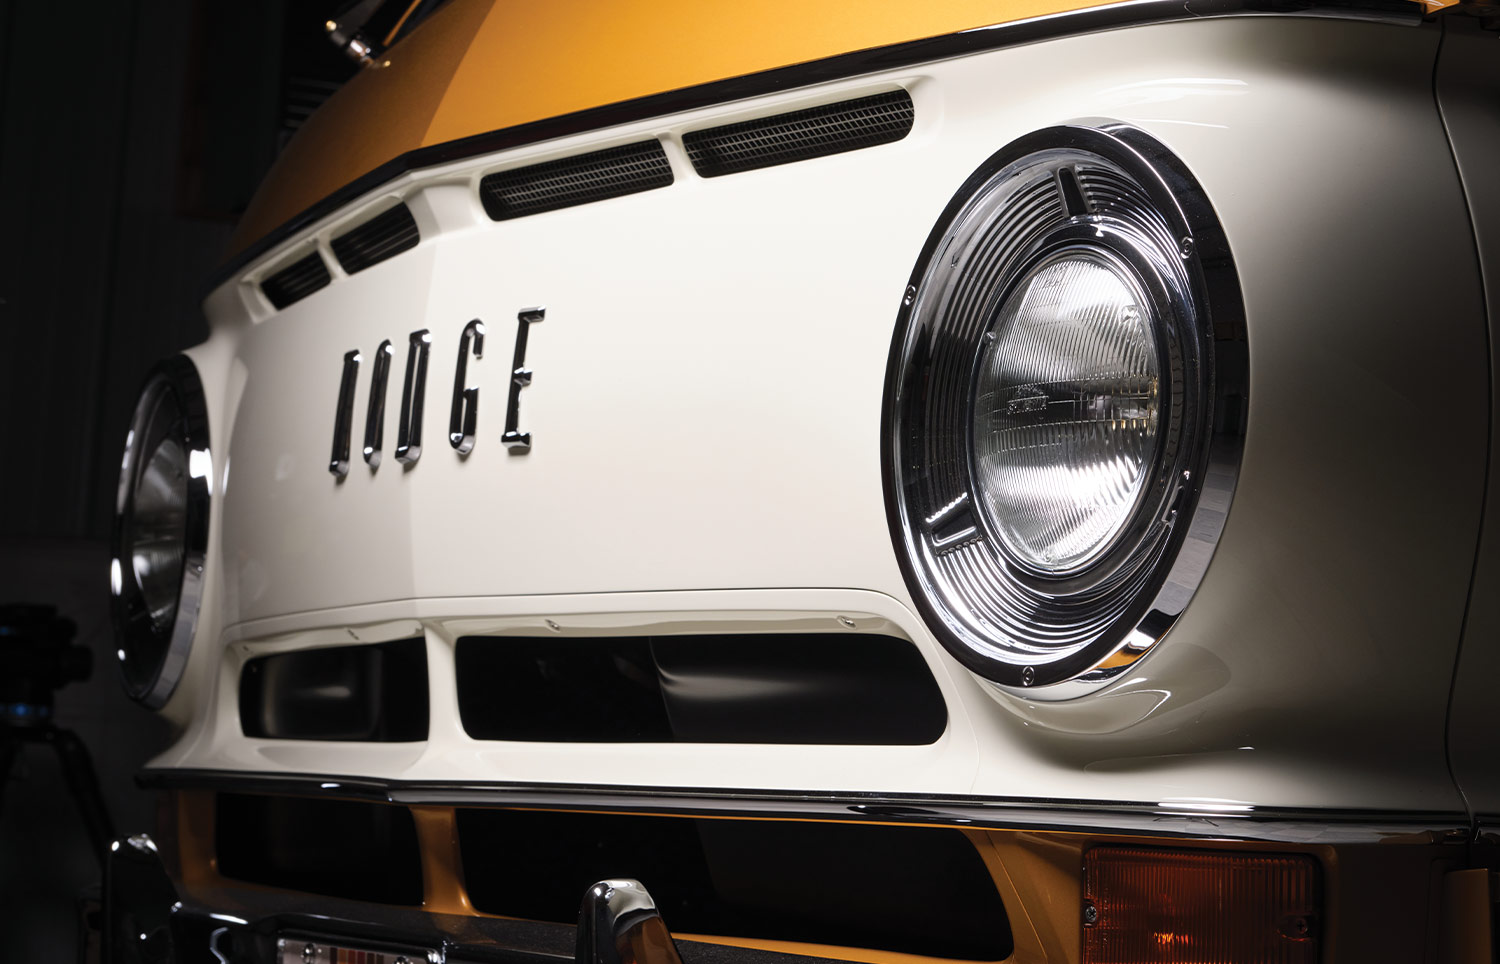 close view of the "Dodge" emblem on the face of the '69 Dodge A108